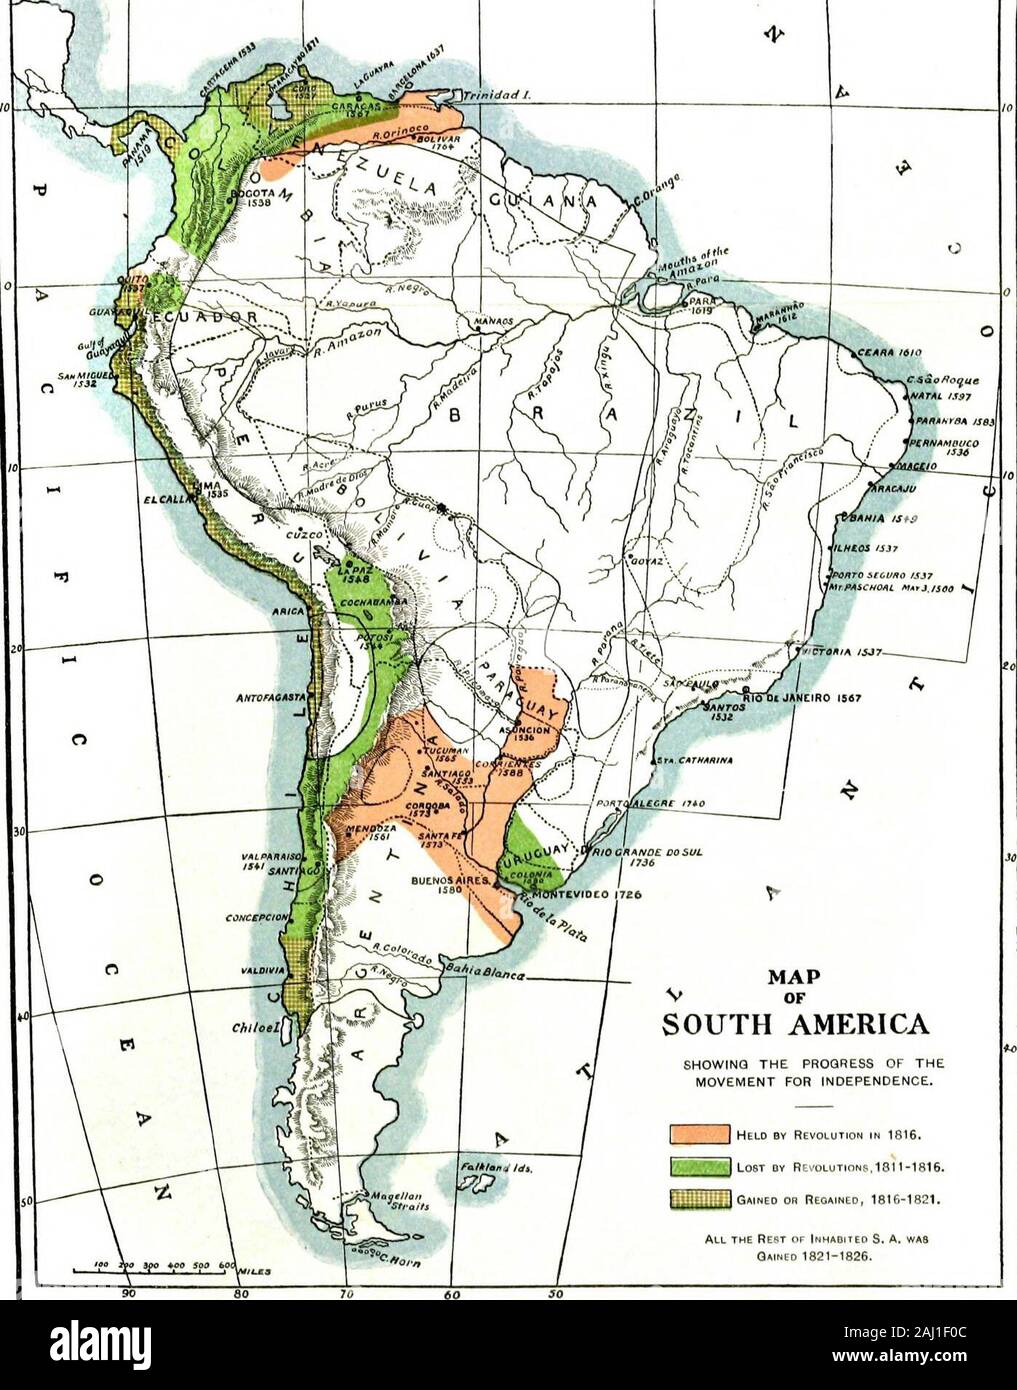 The South American republics . §Trinidad I.. SOUTH AMERICA SHOWING THE PROGRESS OF THEMOVEMENT FOR INDEPENDENCE. Held by Revolution in 1816. J Lost qv Revolutions, 1811-1816.Gained or Regained, 1816-1821. All the Rest of Inhabited S. A, wasGained 1821-1826. INf)EX Abascal, General, Viceroy ofPeru, 73-78, 163, 168, 260 Abibe Mountains, 40S Acha, General, 276 Aconcagua River, the, 223;plain of, 168 Acosta, Juan, 56 Acosta, President of Colombia,464, 465 Acre River, the, 280 Adelantados, 26, 349, 414, 417Agua Dulce, battle of, 484, 485Alansi, valley of, 291Alcantara, Francisco, 26, 46Alfaro, Pre Stock Photo